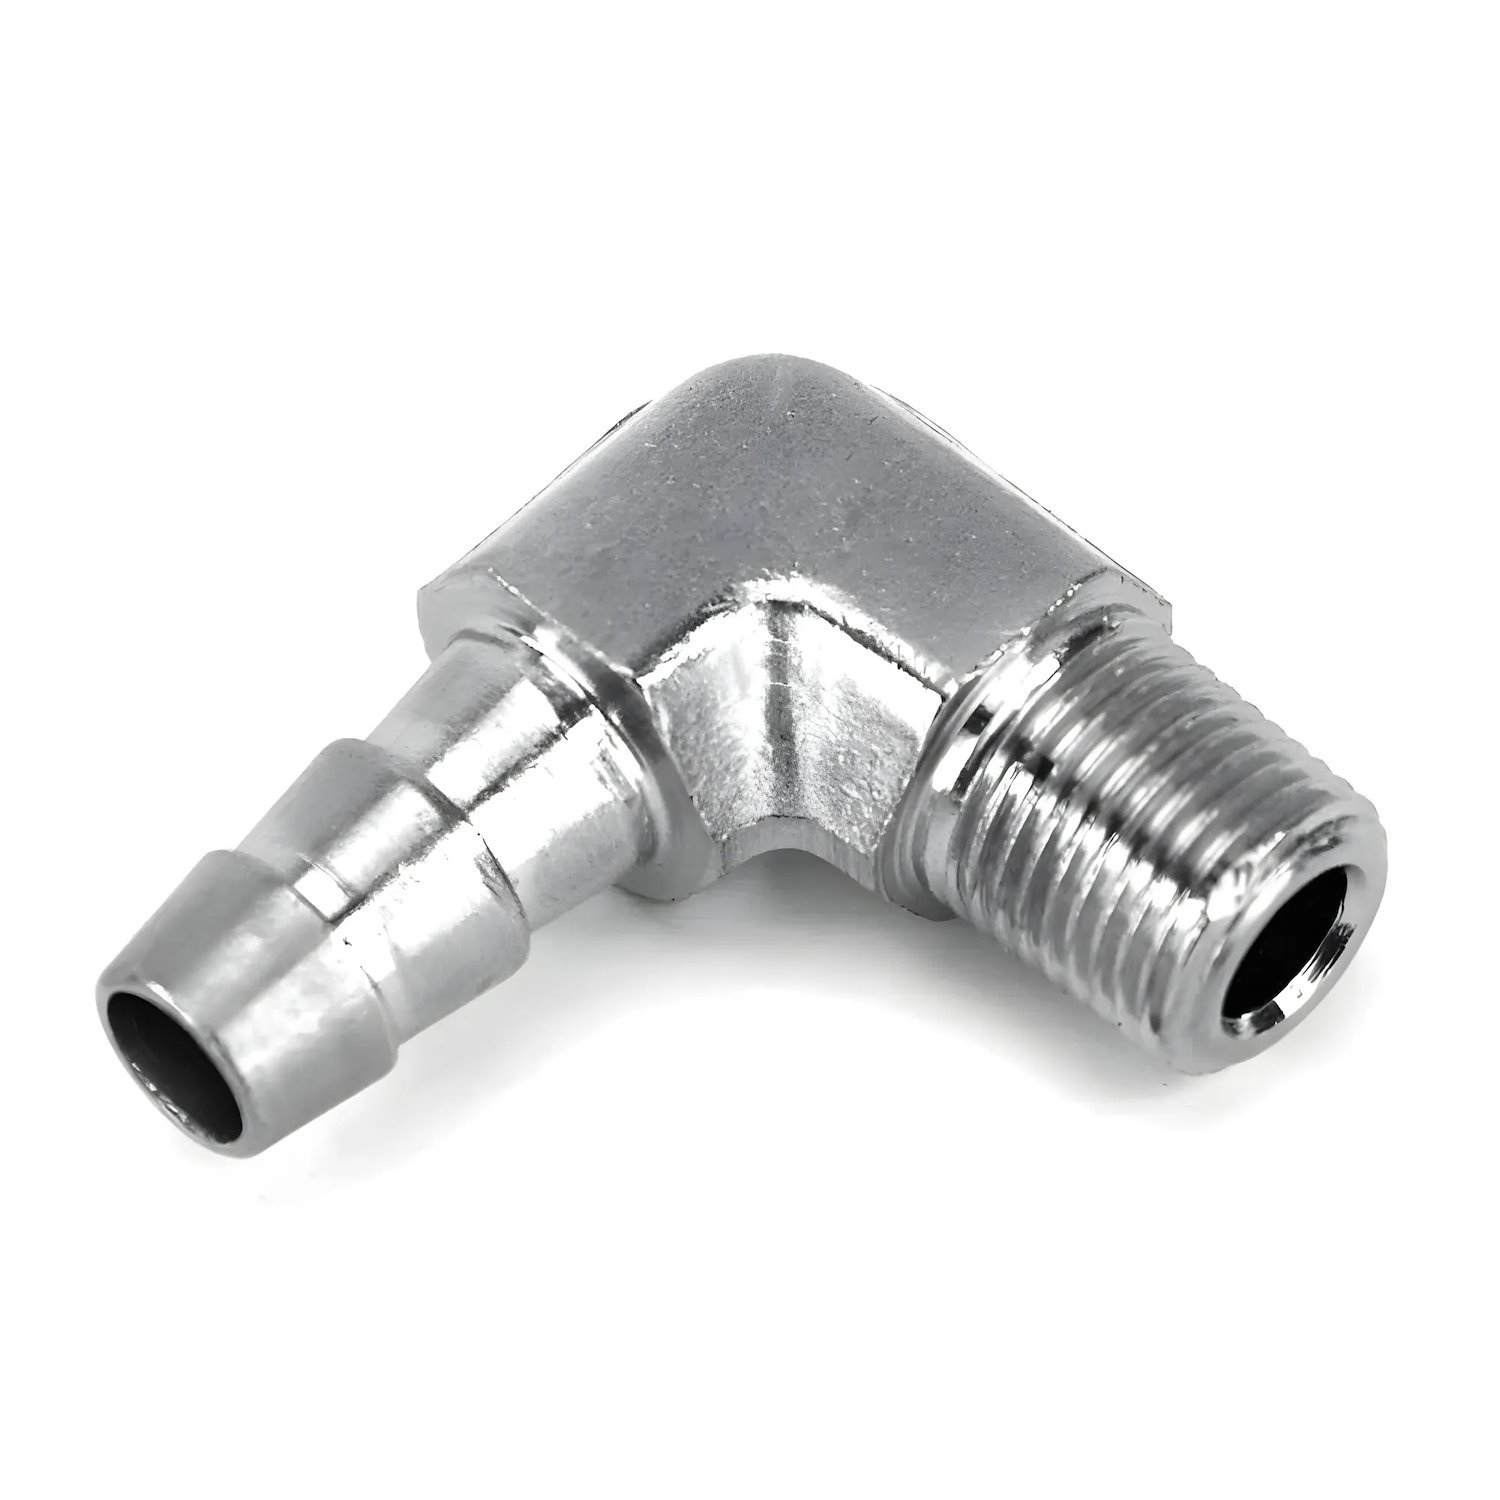 00-01922-B 1/8 in. NPT x 5/16 in. 90-Degree Hose Barb Fitting, Male/Male